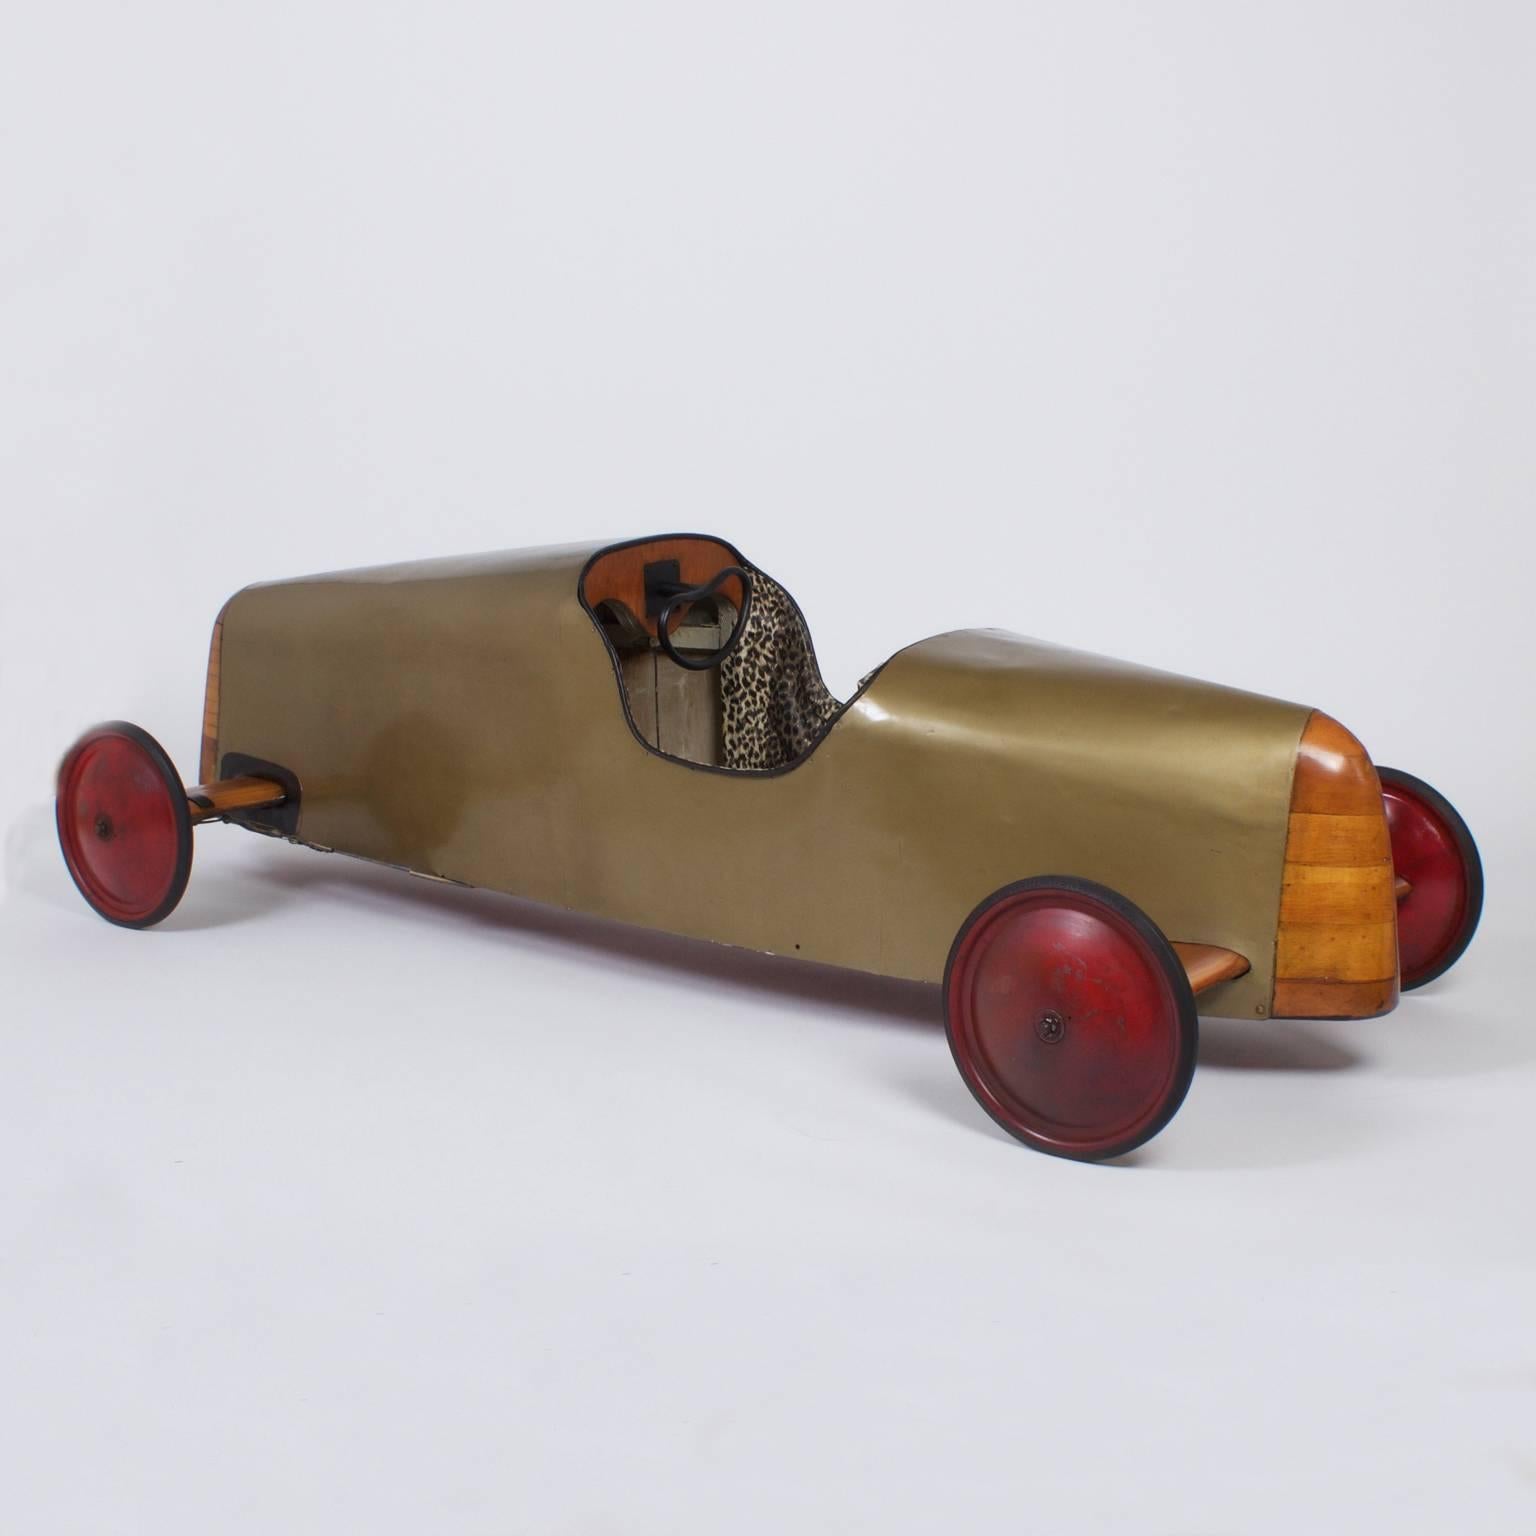 soap box derby car for sale